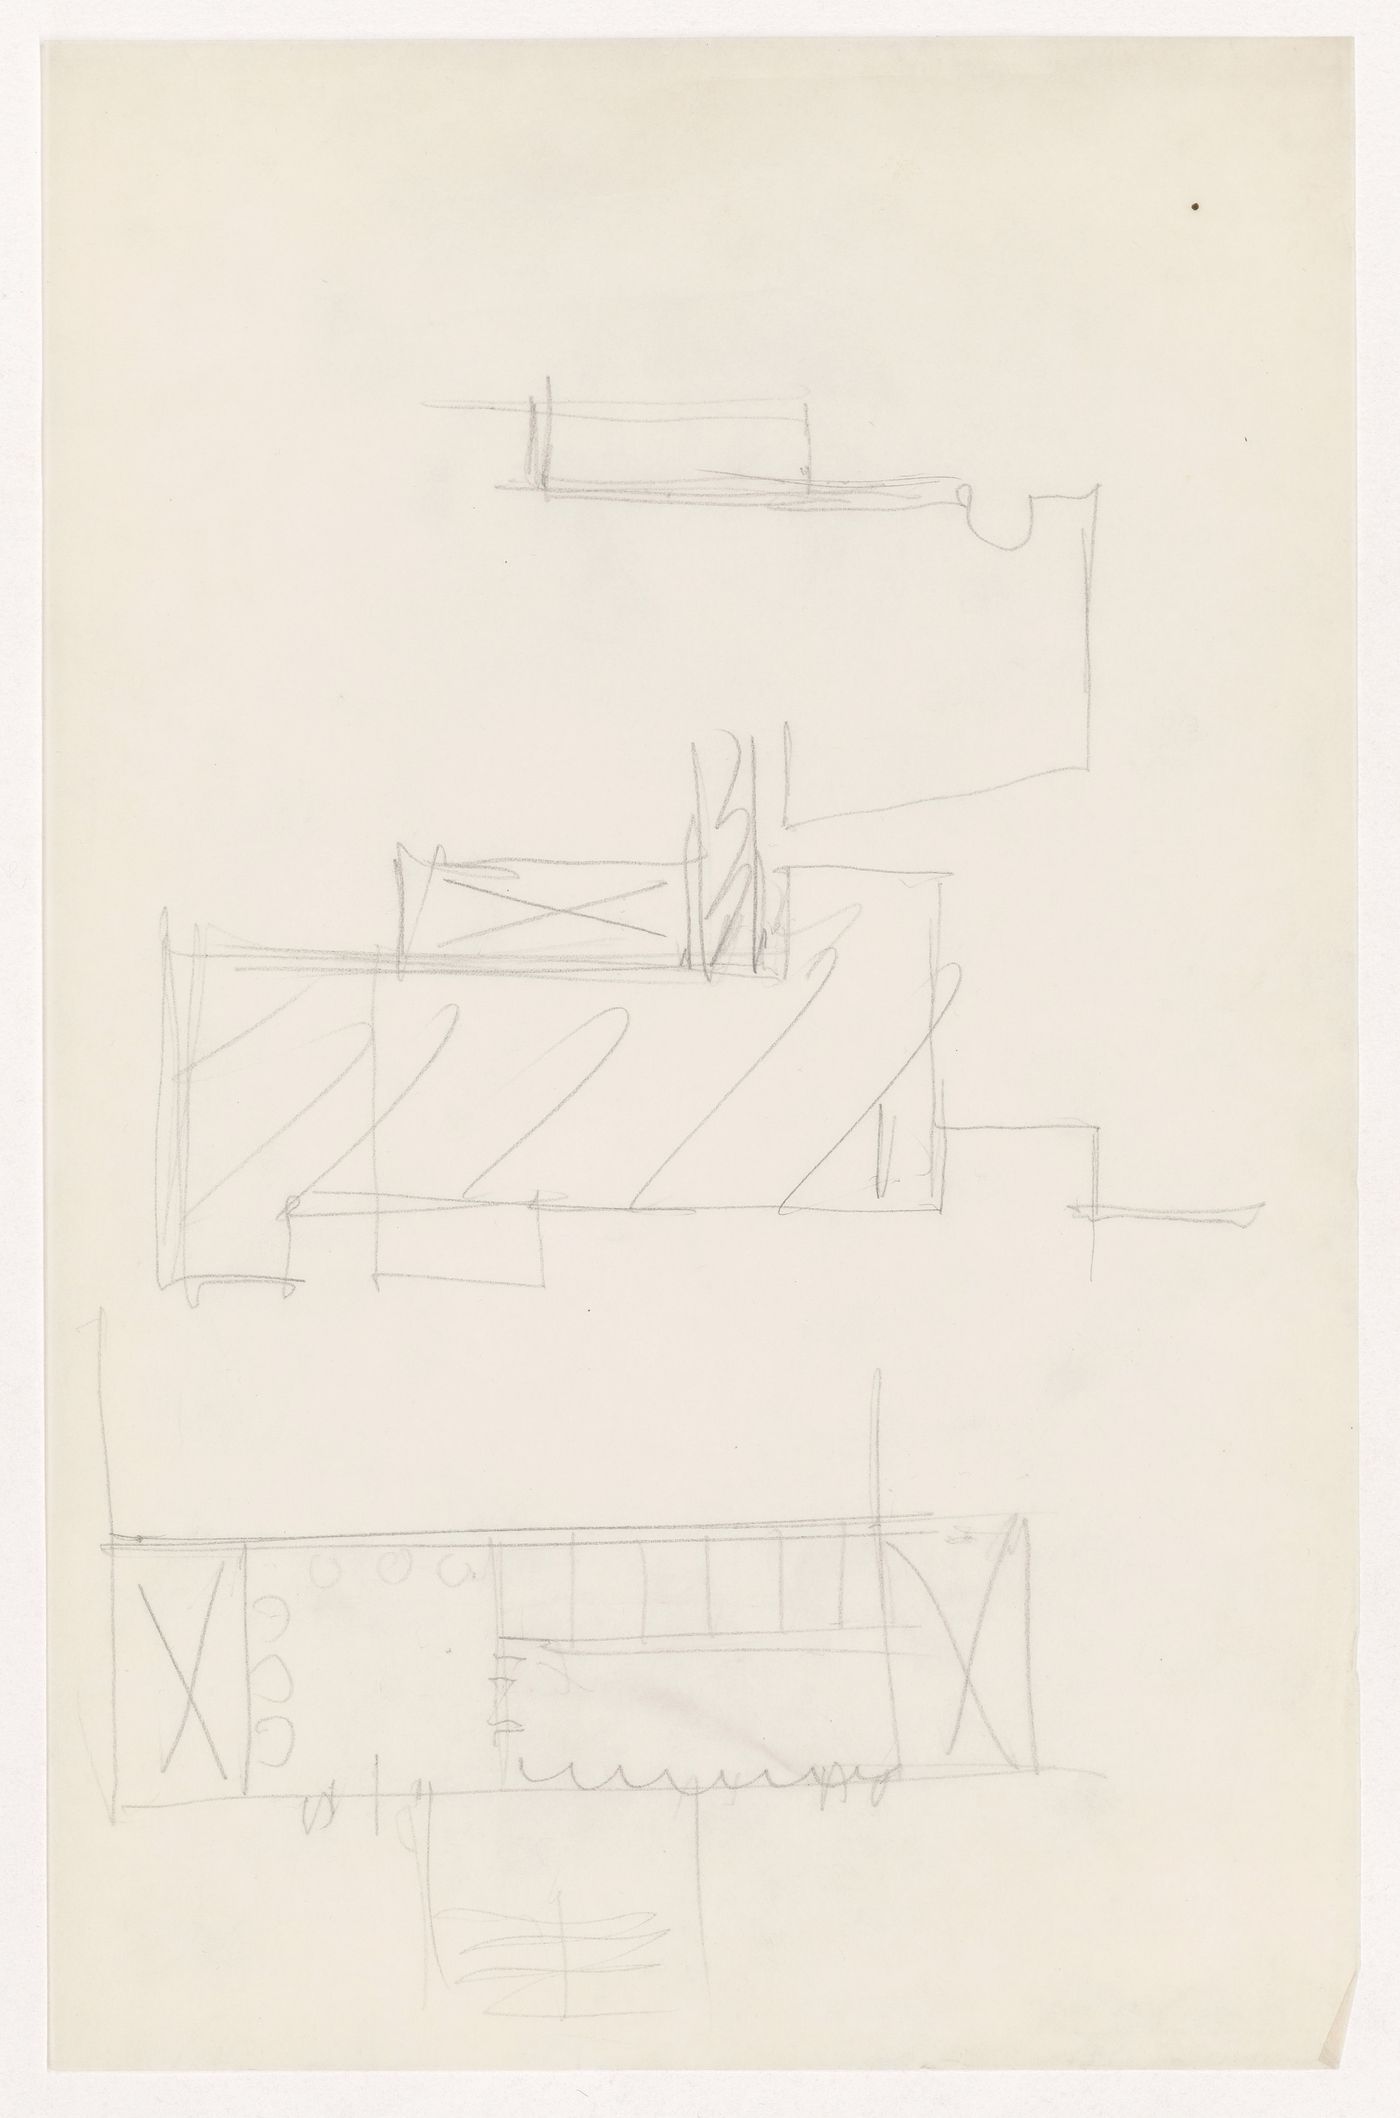 Partial sketch plan for the Metallurgy Building, Illinois Institute of Technology, Chicago, with unidentified sketches